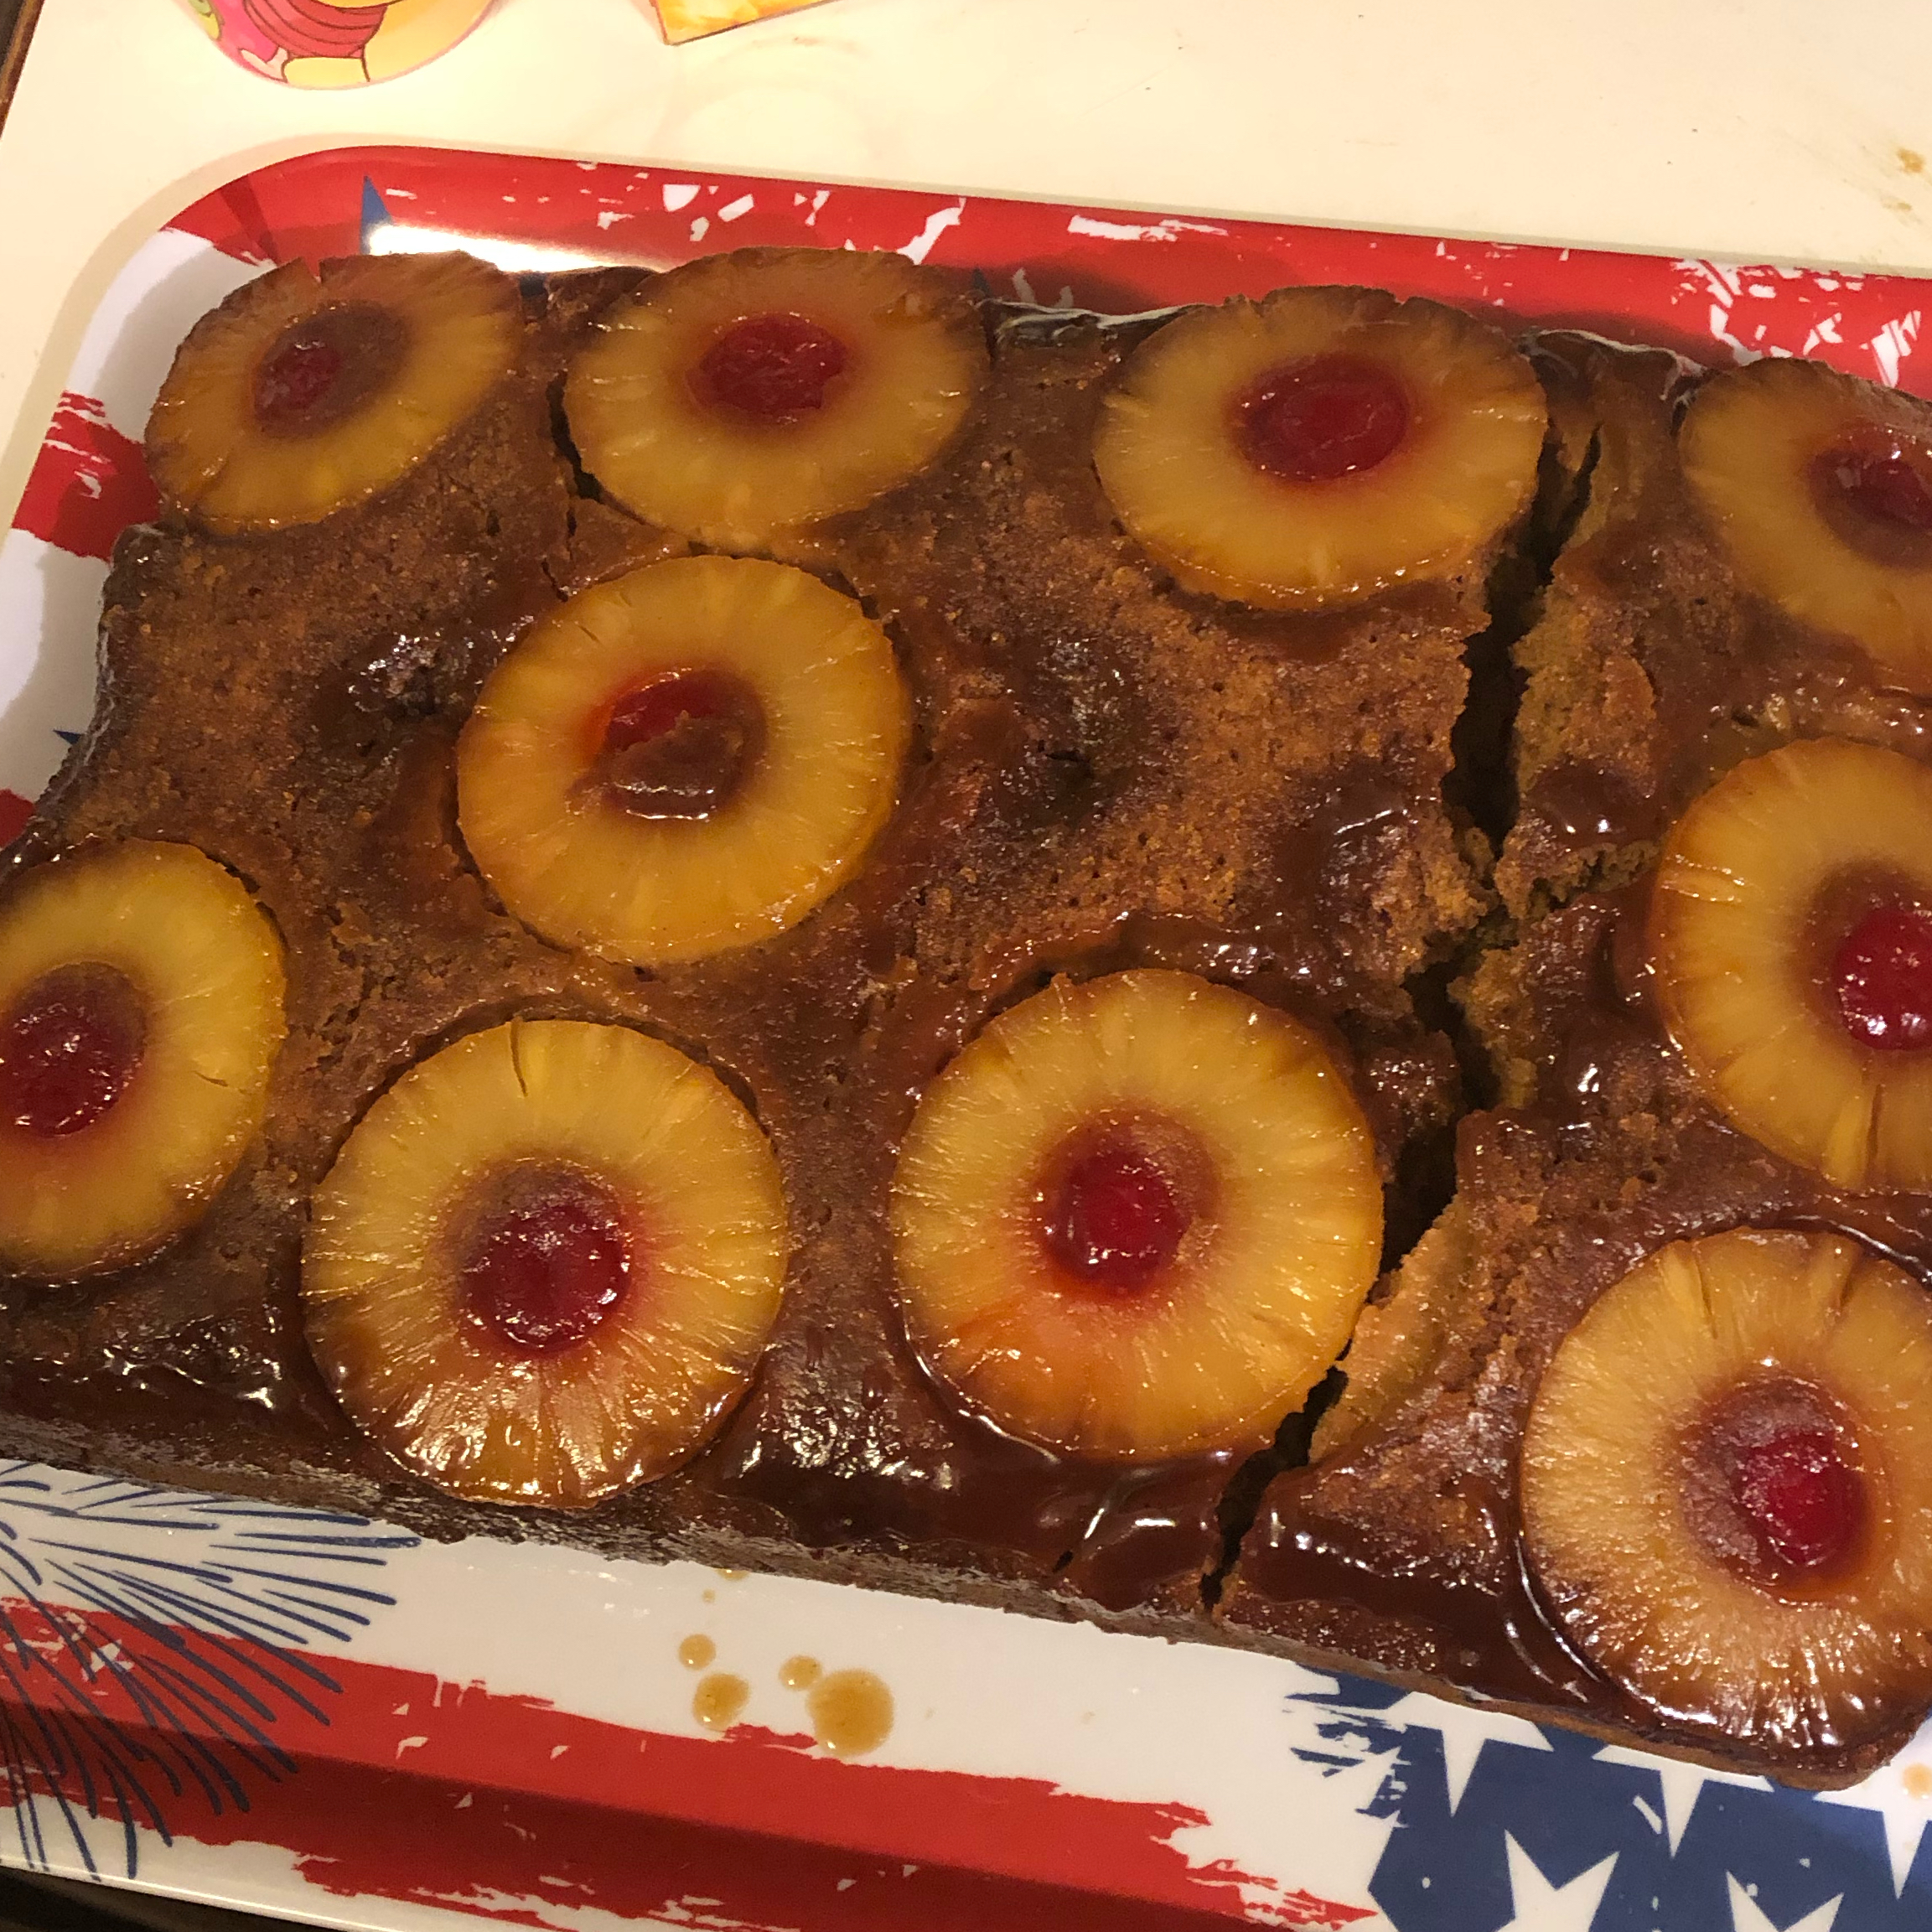 Spicy Pineapple Upside Down Cake